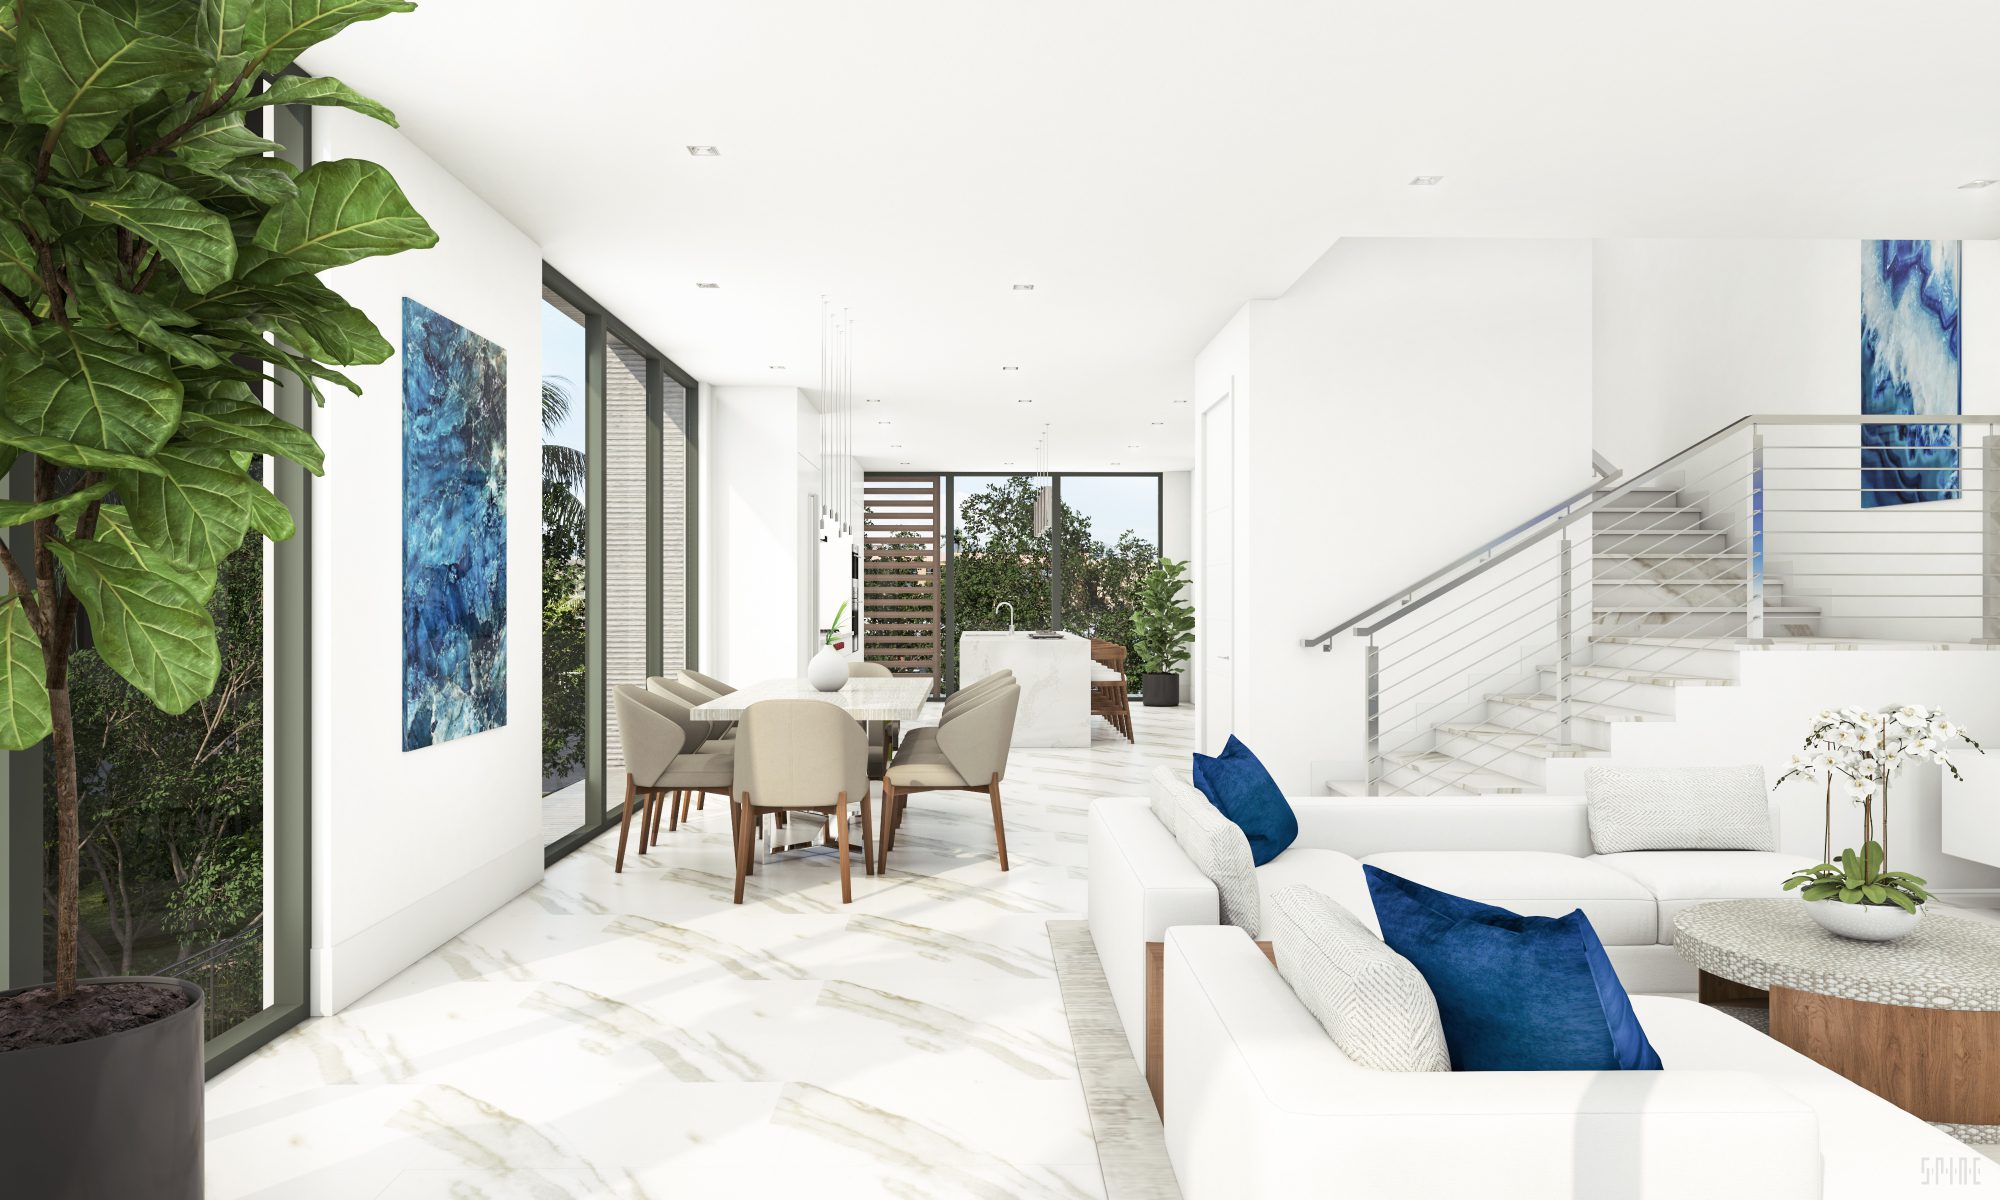 Eden Living and Dining Koya Bay Rendering with furniture and potted plants as well as stairs to upper level